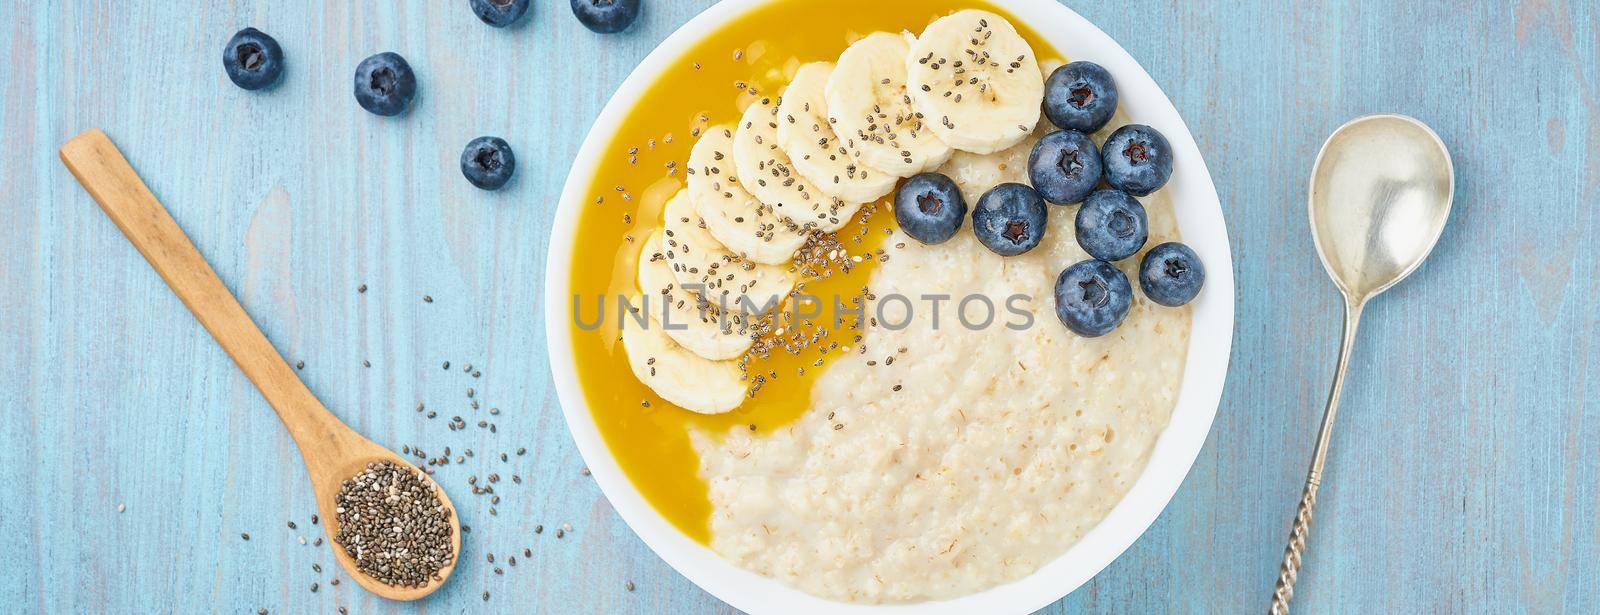 Banner with oatmeal, bananas, blueberries, chia seeds, mango jam on blue wooden background. Top view. Healthy breakfast. by NataBene